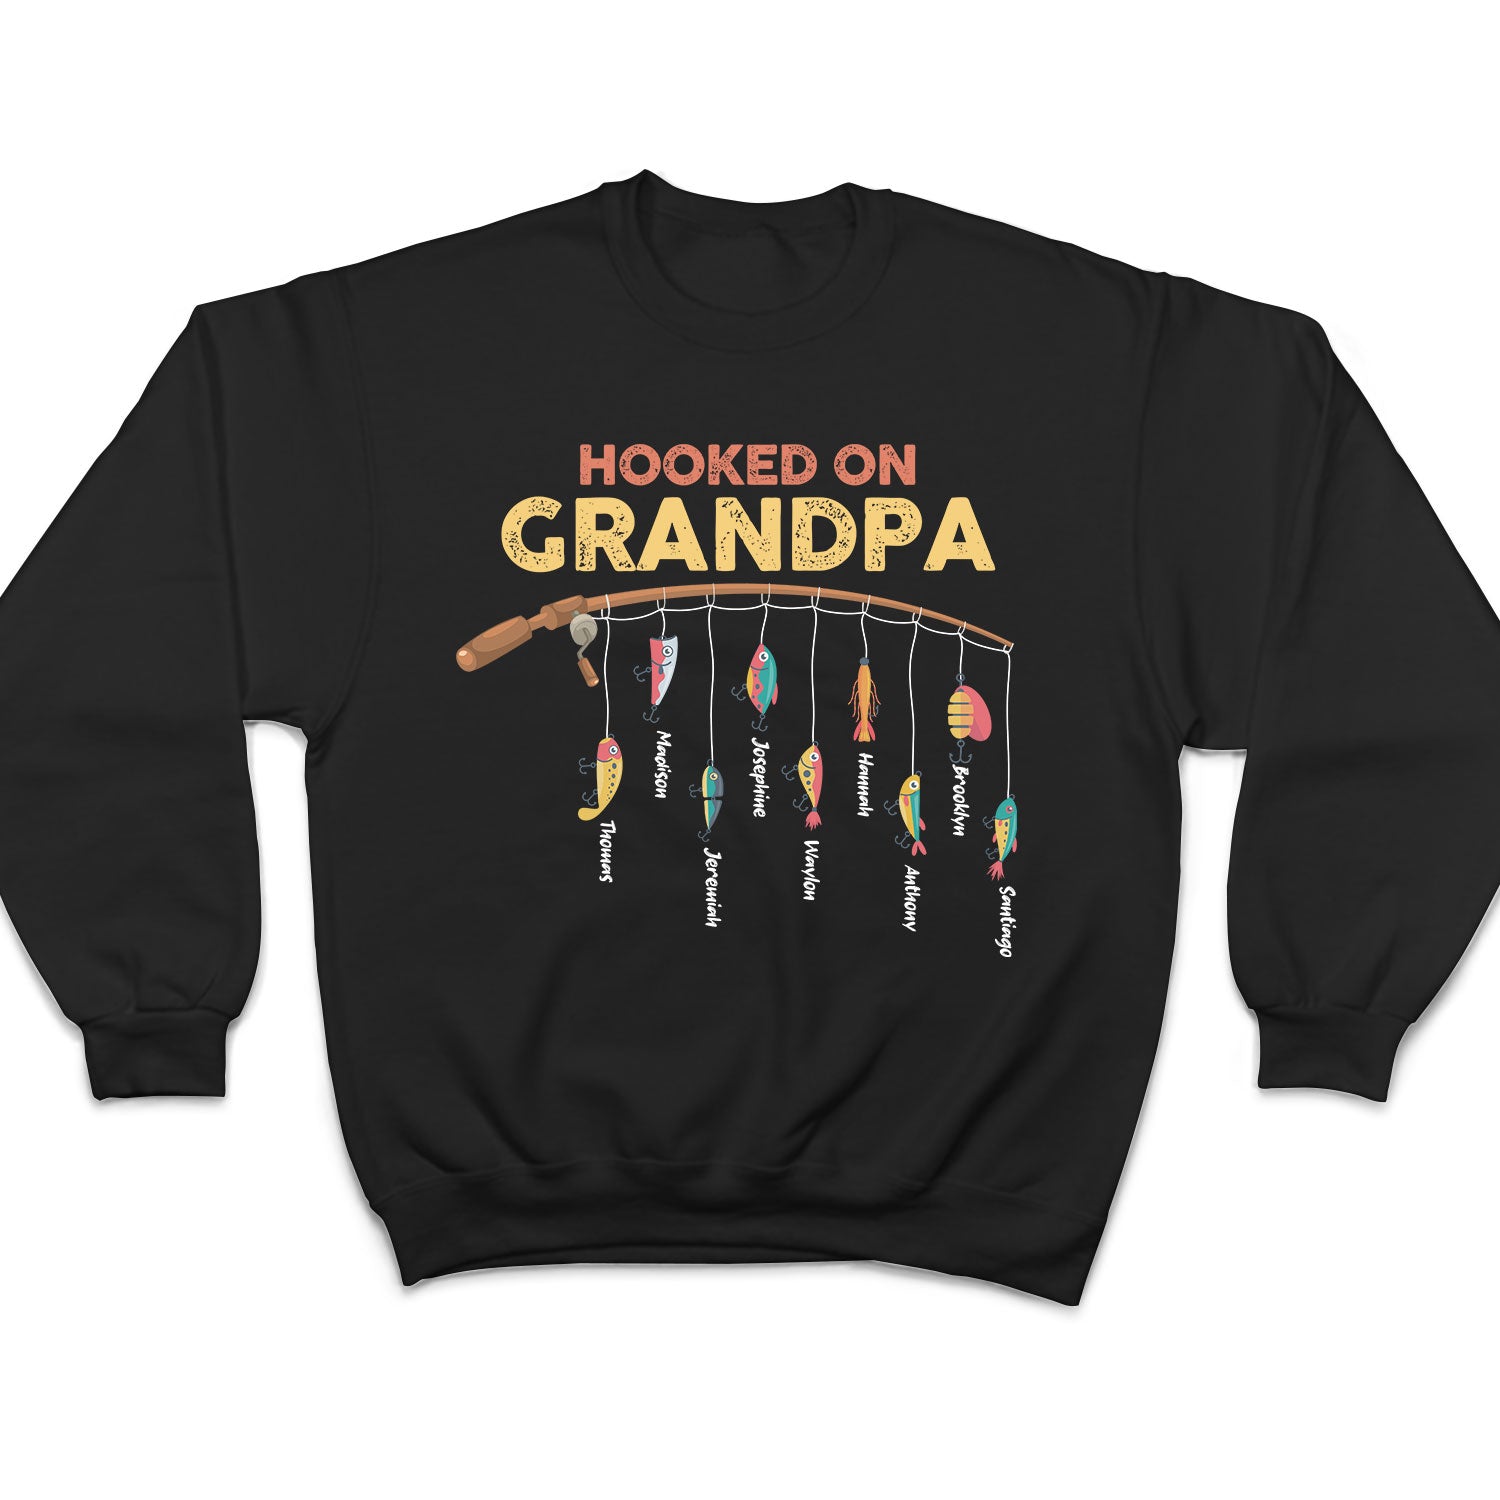 Fishing Hooked On Dad, Grandpa - Gift for Father, Grandfather - Personalized T Shirt T-Shirt / Tshirt Black / S